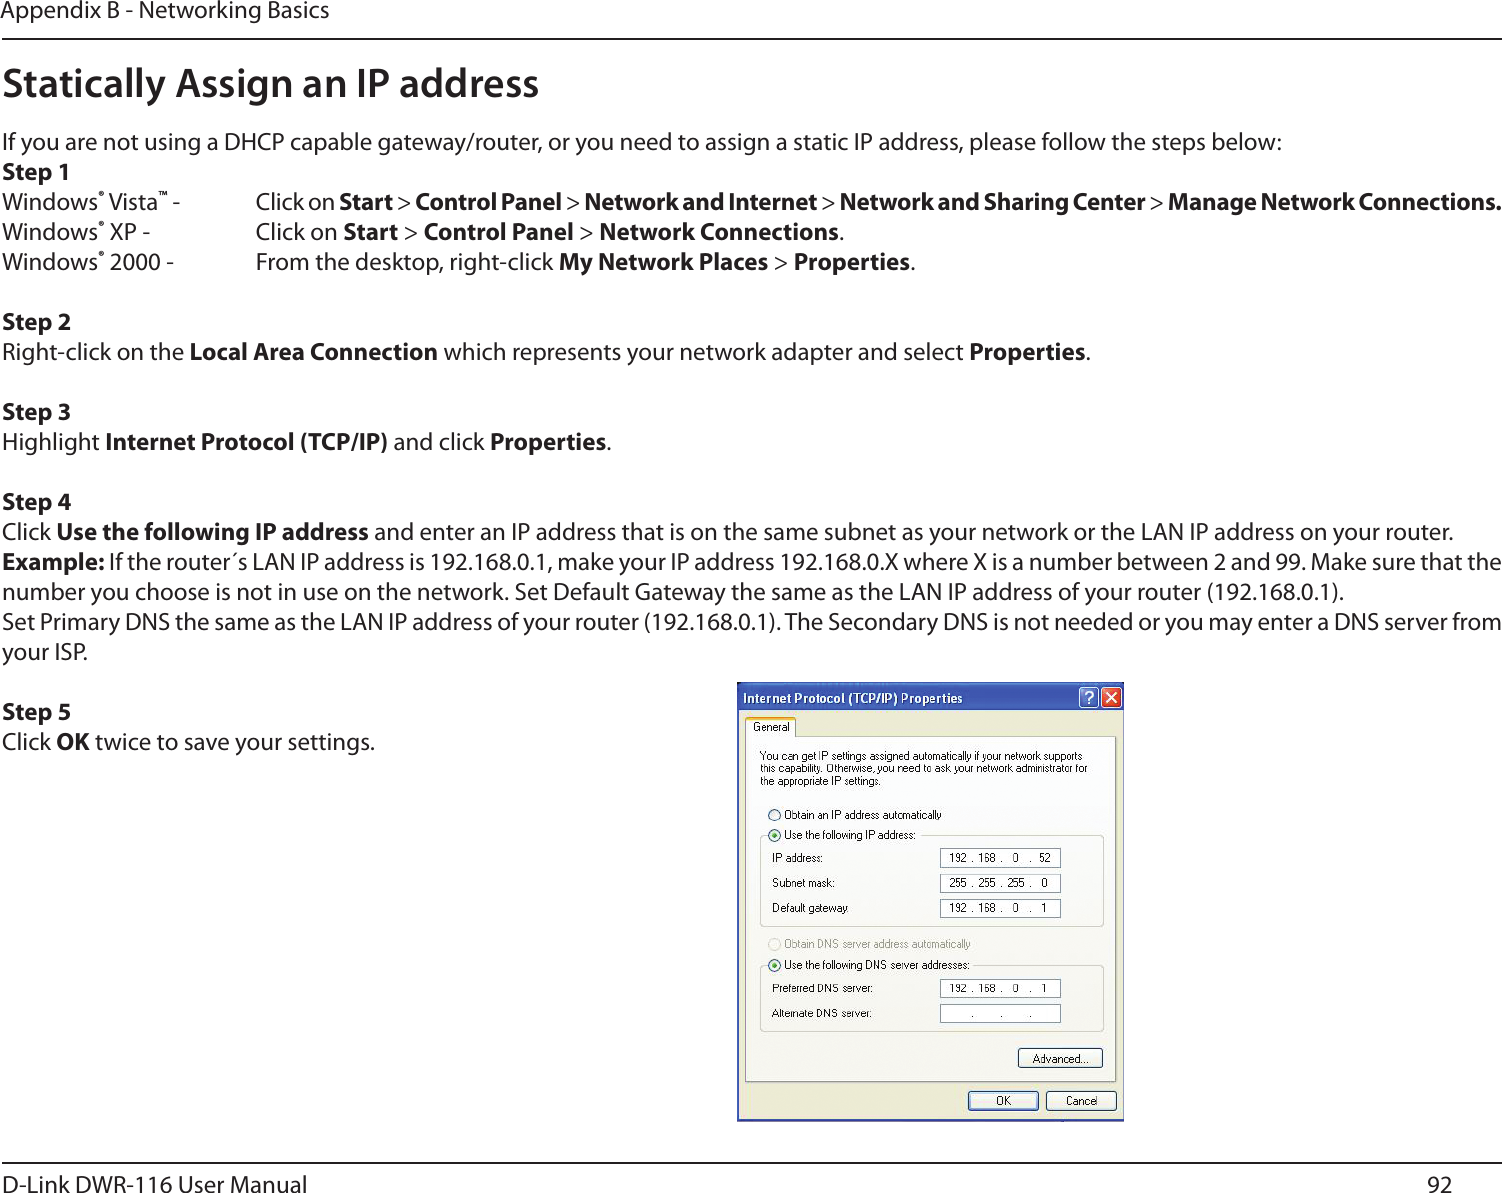 92D-Link DWR-116 User ManualAppendix B - Networking BasicsStatically Assign an IP addressIf you are not using a DHCP capable gateway/router, or you need to assign a static IP address, please follow the steps below:Step 1Windows® Vista™ -  Click on Start &gt; Control Panel &gt; Network and Internet &gt; Network and Sharing Center &gt; Manage Network Connections.Windows® XP -  Click on Start &gt; Control Panel &gt; Network Connections.Windows® 2000 -  From the desktop, right-click My Network Places &gt; Properties.Step 2Right-click on the Local Area Connection which represents your network adapter and select Properties.Step 3Highlight Internet Protocol (TCP/IP) and click Properties.Step 4Click Use the following IP address and enter an IP address that is on the same subnet as your network or the LAN IP address on your router. Example: If the router´s LAN IP address is 192.168.0.1, make your IP address 192.168.0.X where X is a number between 2 and 99. Make sure that the number you choose is not in use on the network. Set Default Gateway the same as the LAN IP address of your router (192.168.0.1). Set Primary DNS the same as the LAN IP address of your router (192.168.0.1). The Secondary DNS is not needed or you may enter a DNS server from your ISP.Step 5Click OK twice to save your settings.